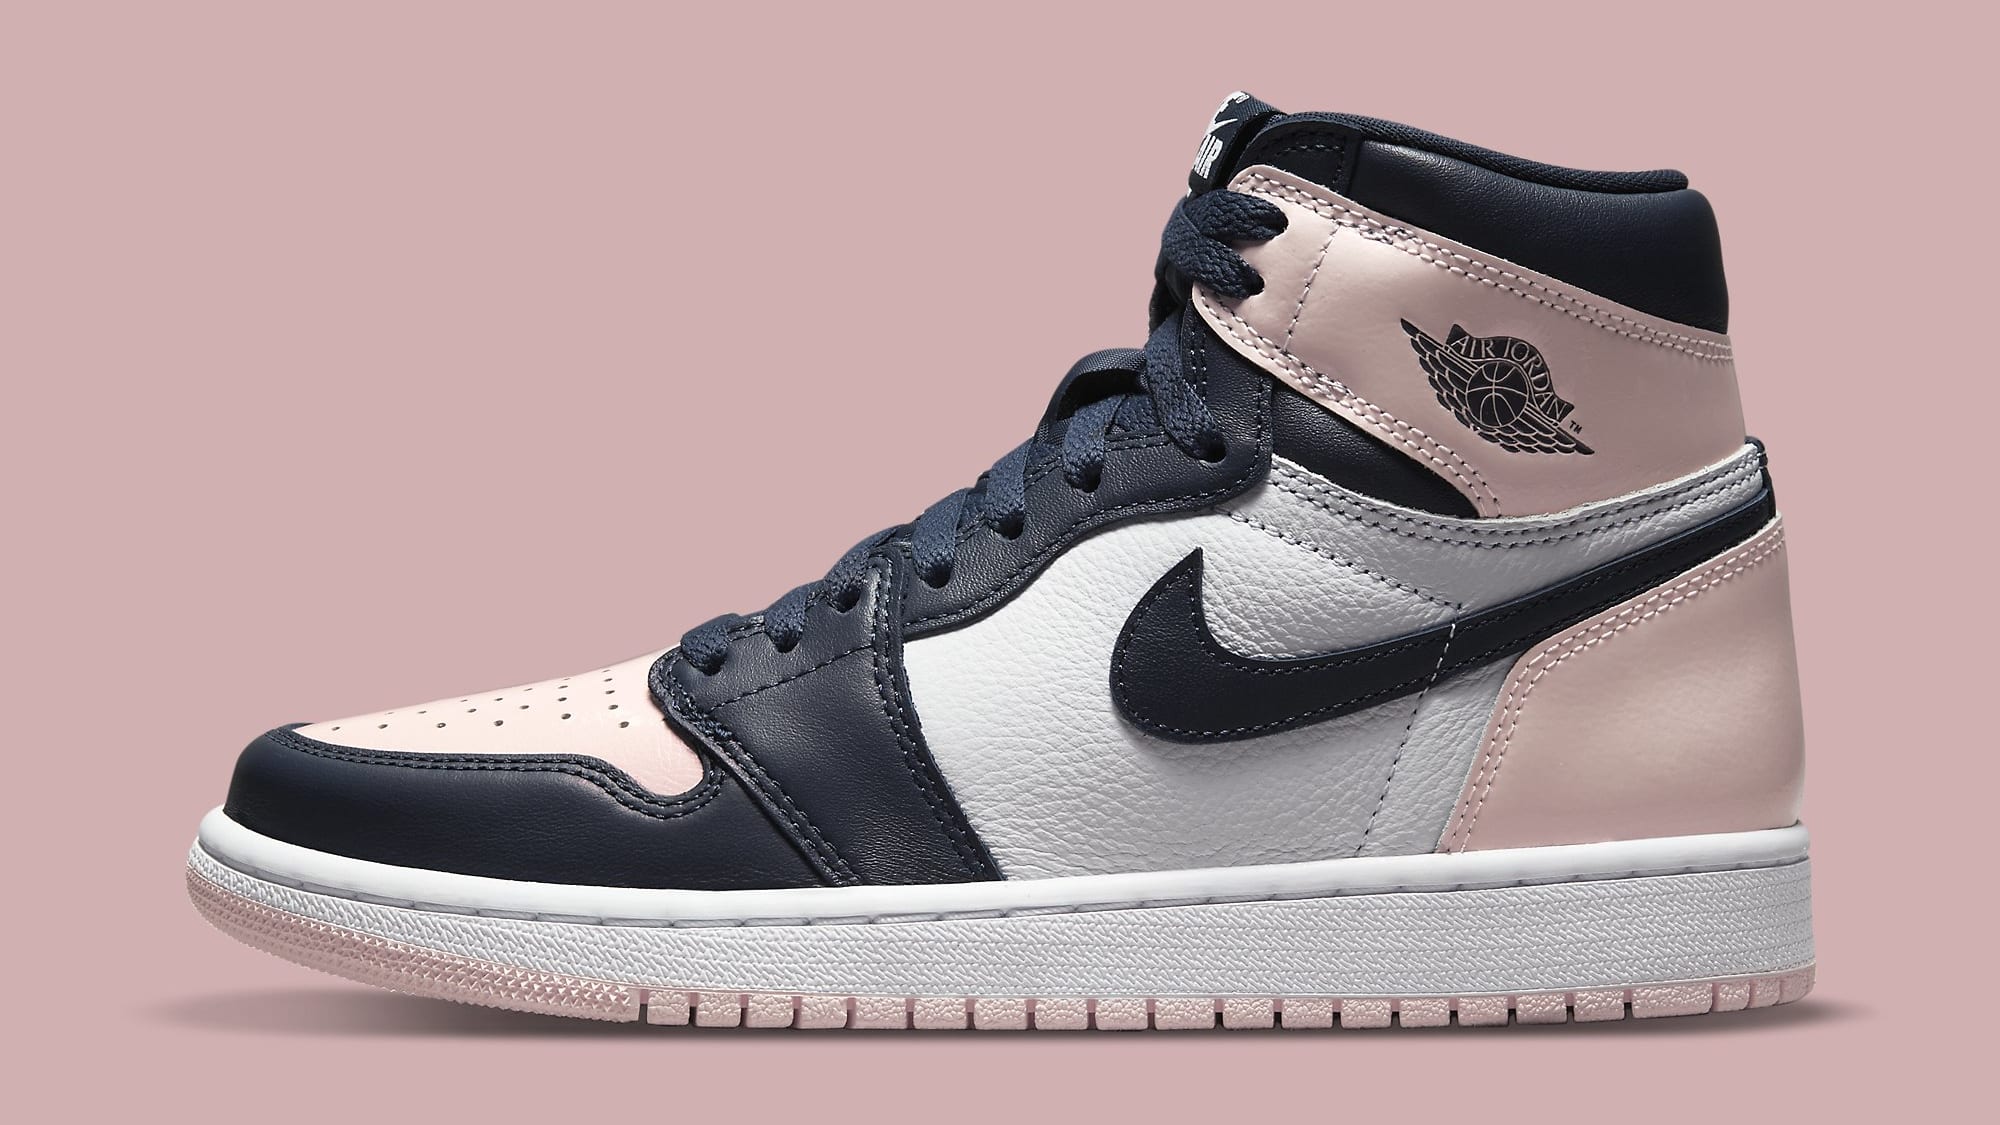 top notch skinny commonplace Air Jordan 1 High OG SE Women's 'Atmosphere' Release Date DD9335-641 | Sole  Collector